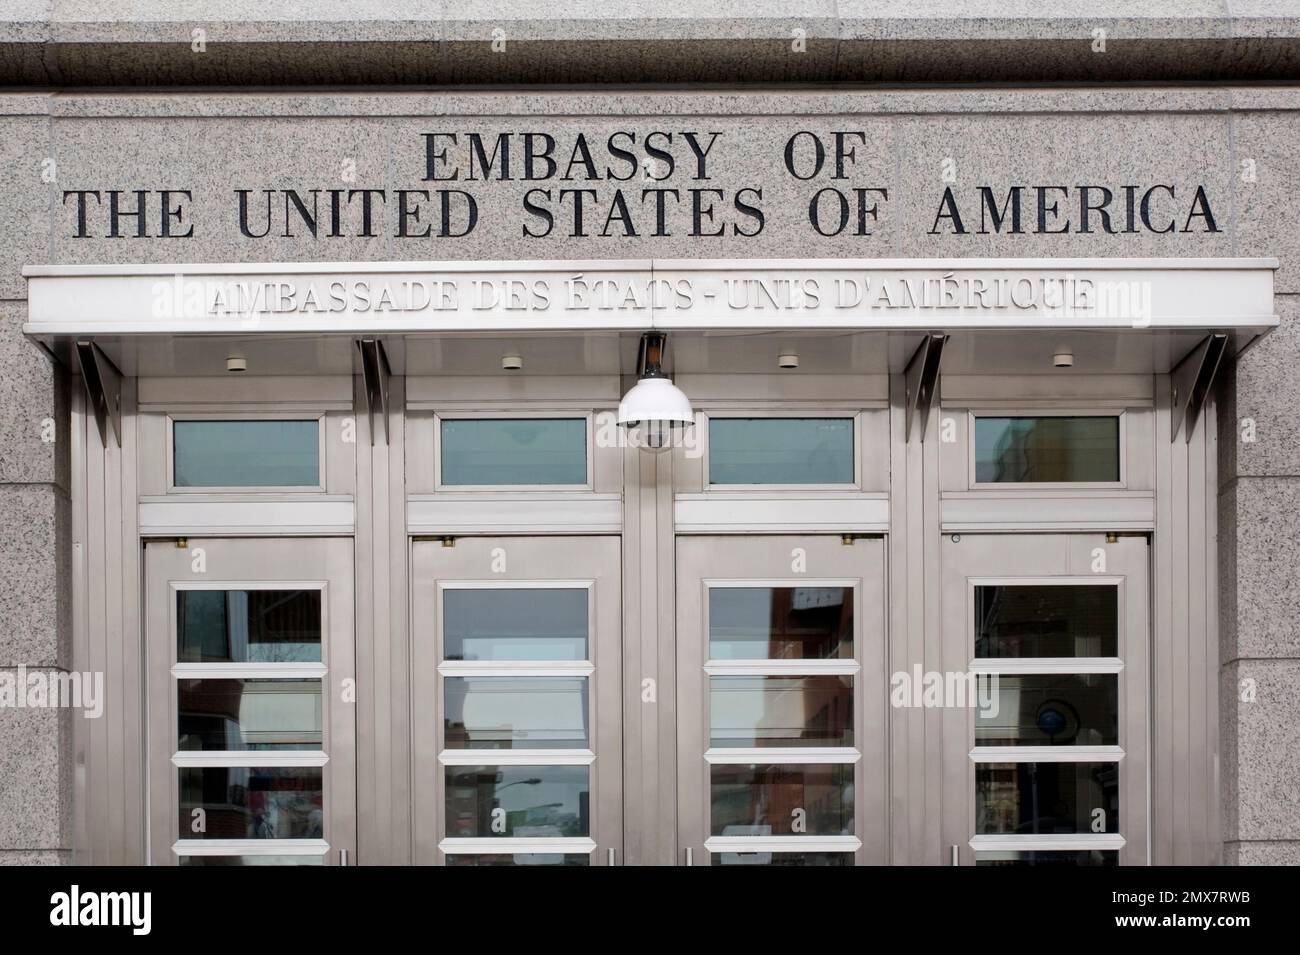 The United States of America embassy building facade in spring, Ottawa, Ontario, Canada. Stock Photo